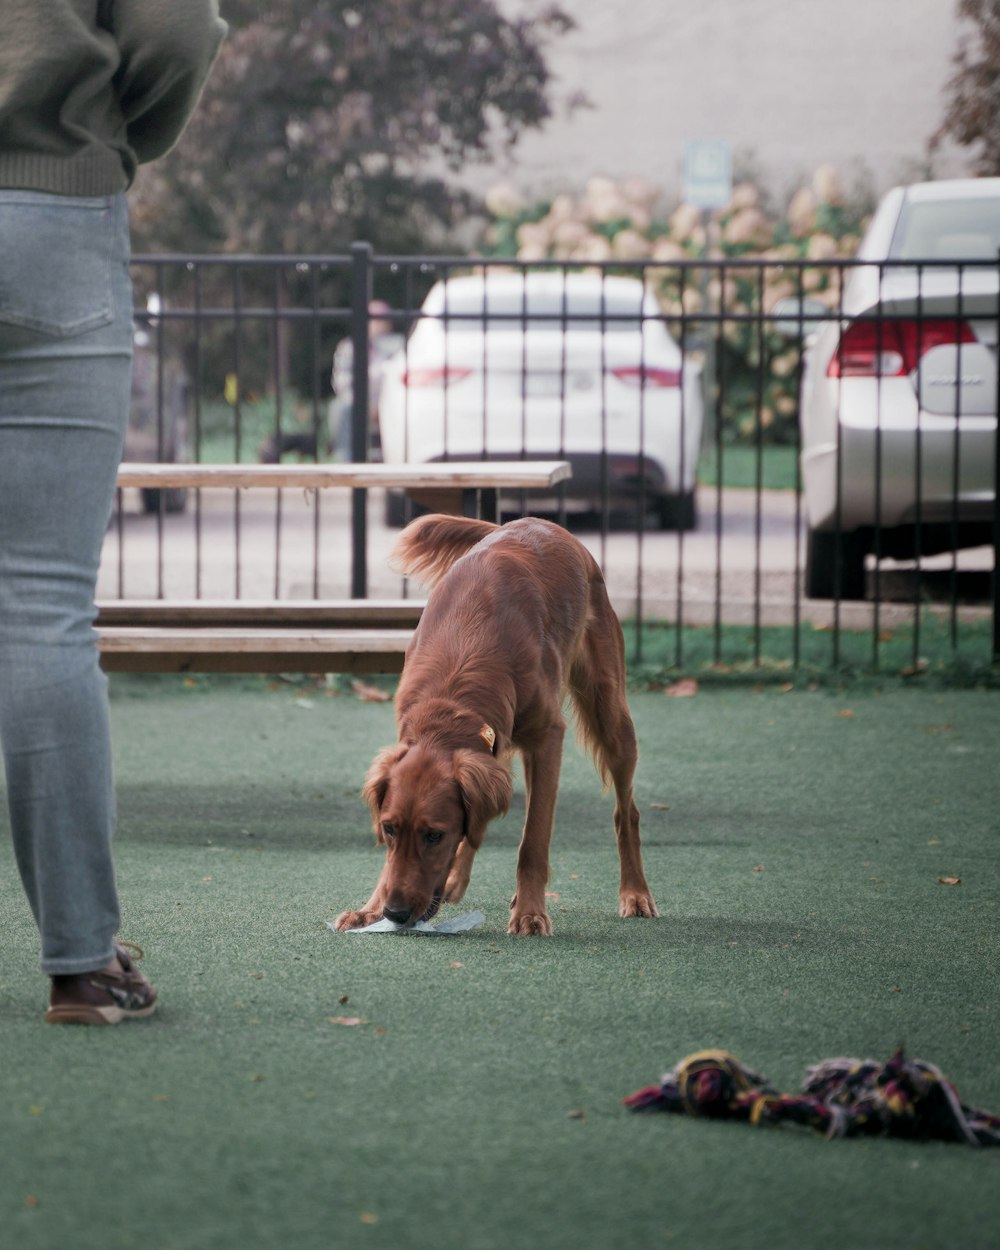 a dog sniffing a persons shoes on the ground